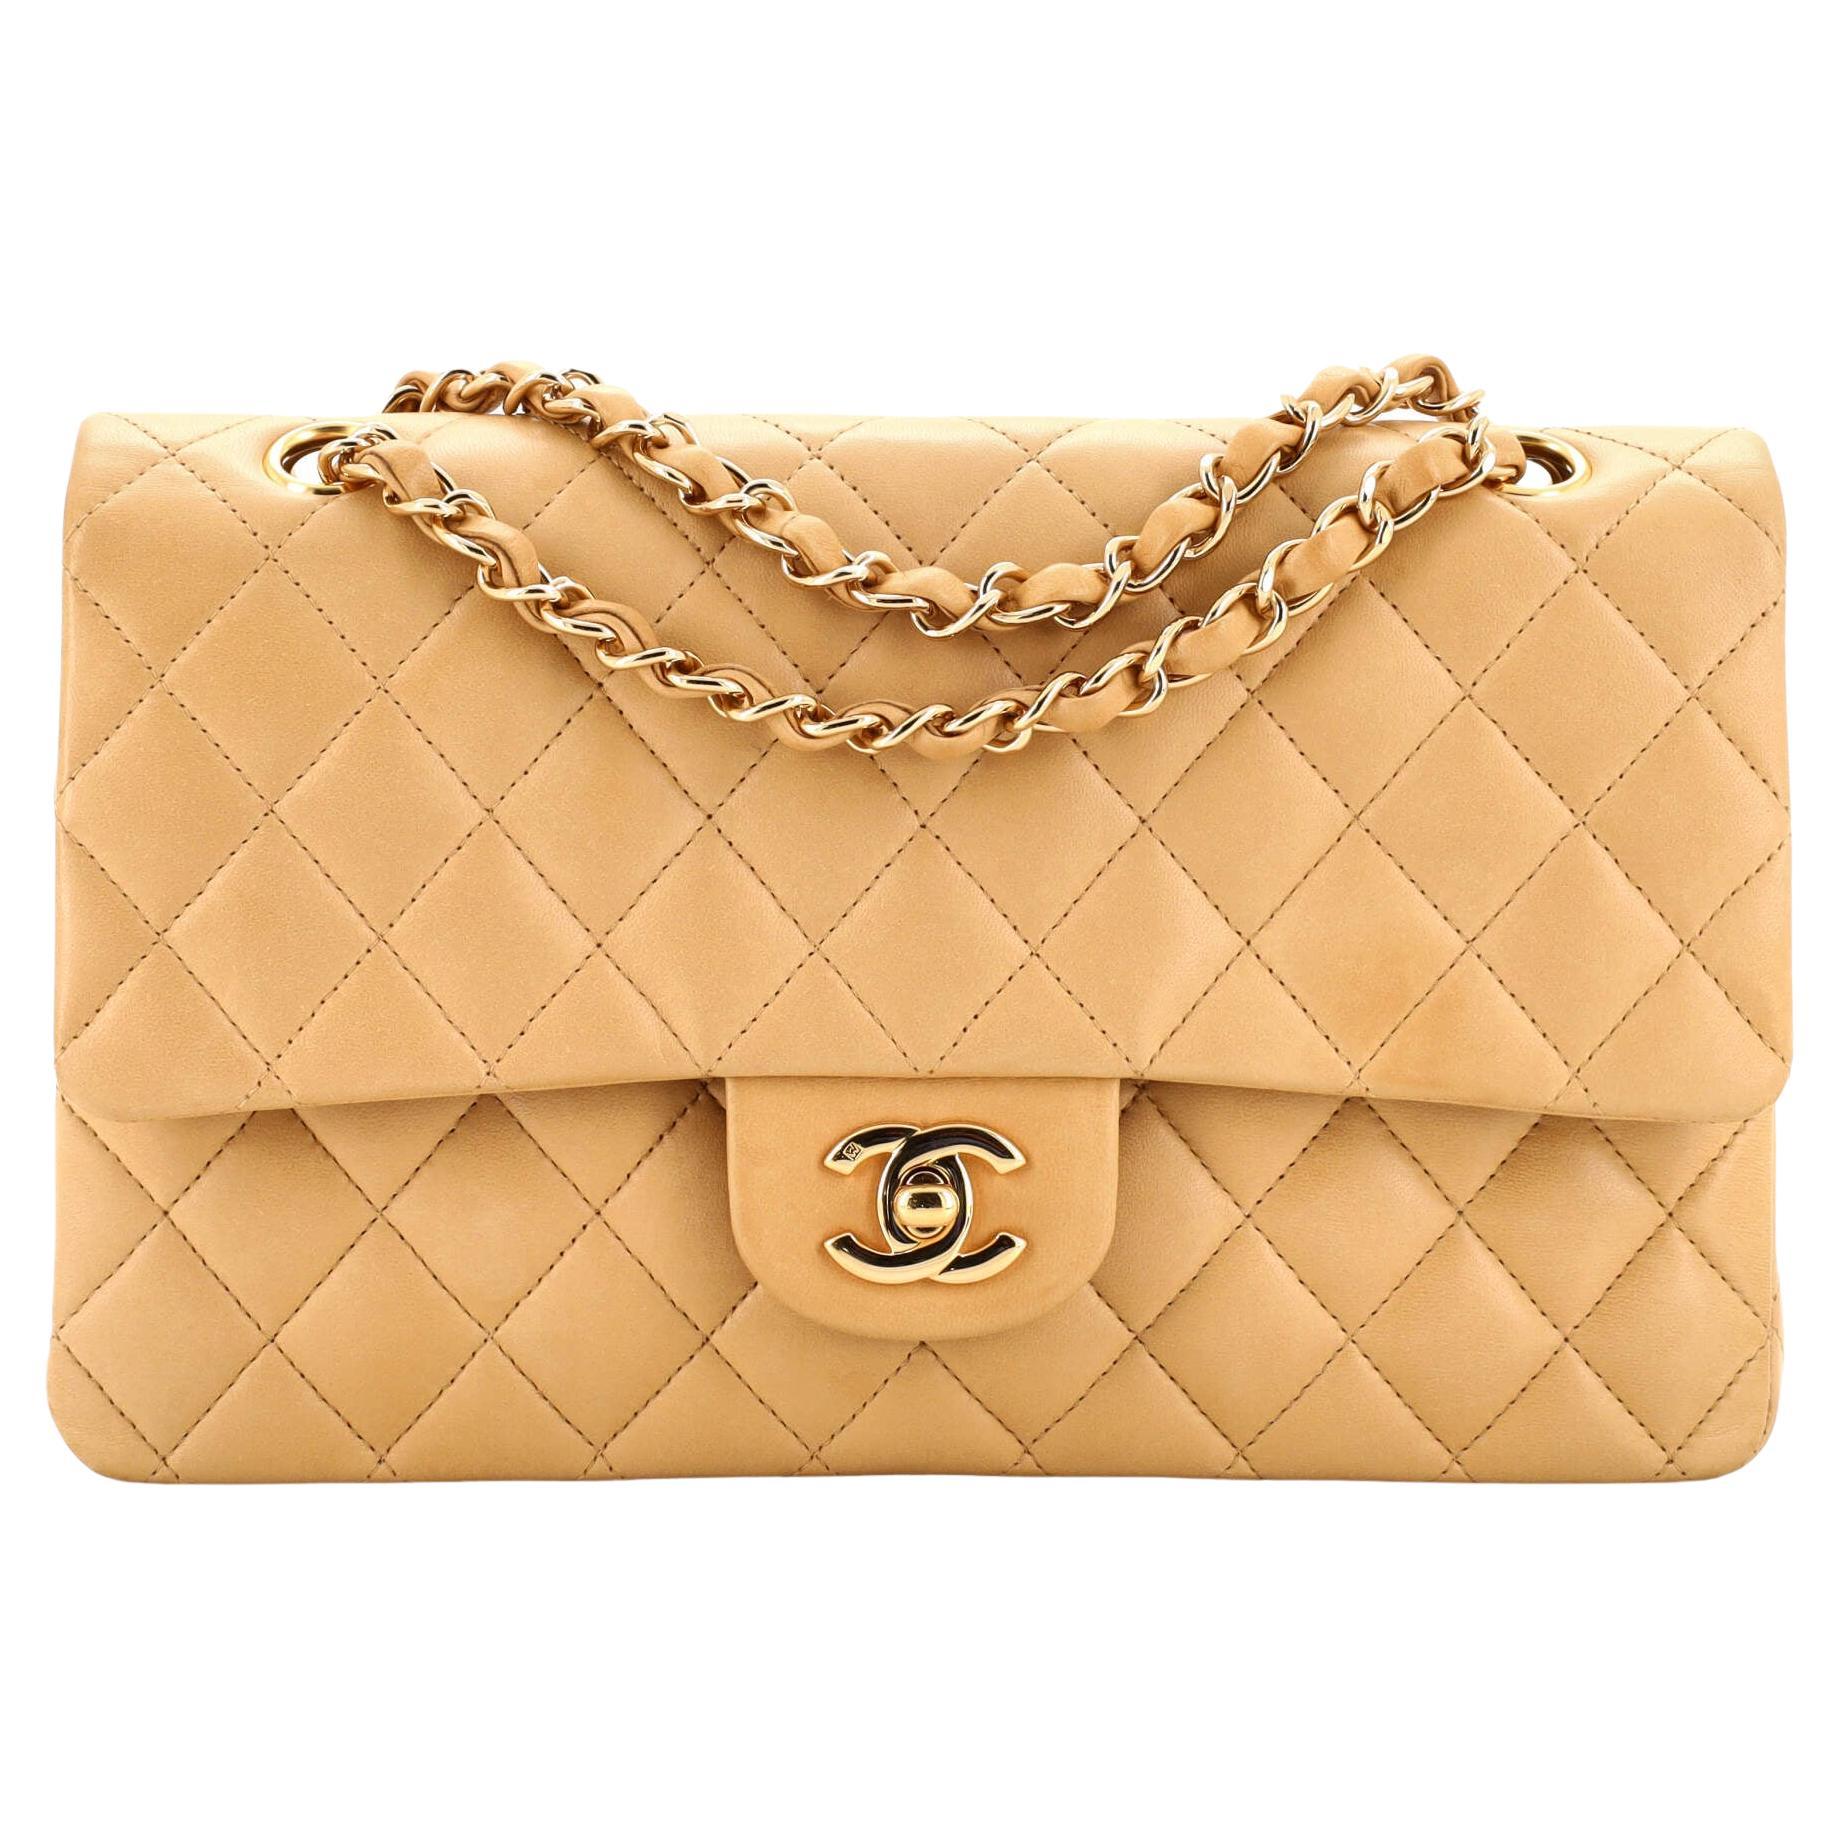 Chanel Metallic Gold Quilted Lambskin Heart Coin Purse Necklace